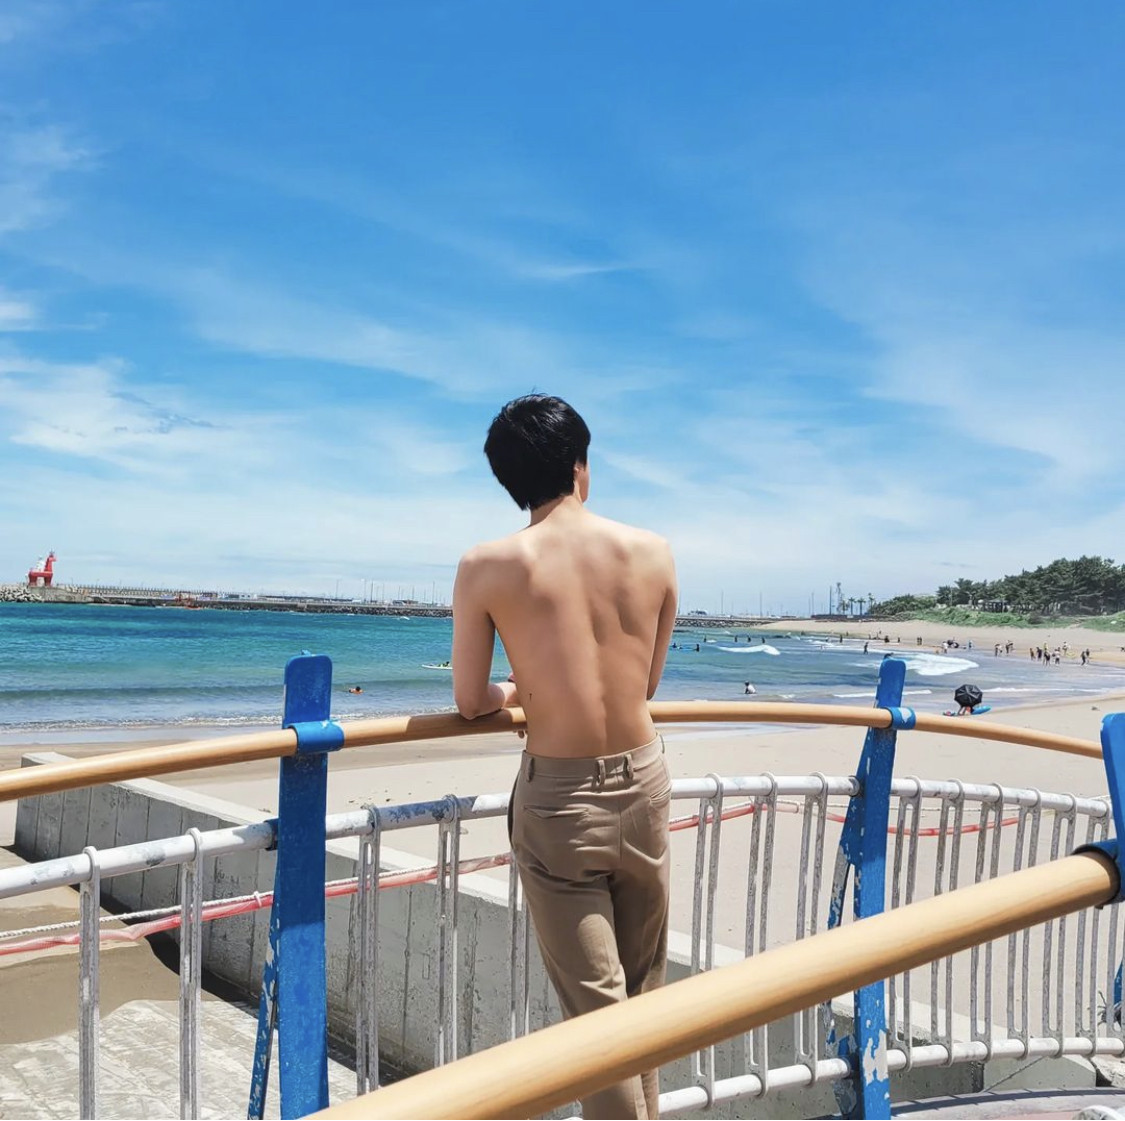 BTS Jin reveals friendship tattoo with topless photos (ft. Jin's back) |  DIPE.CO.KR